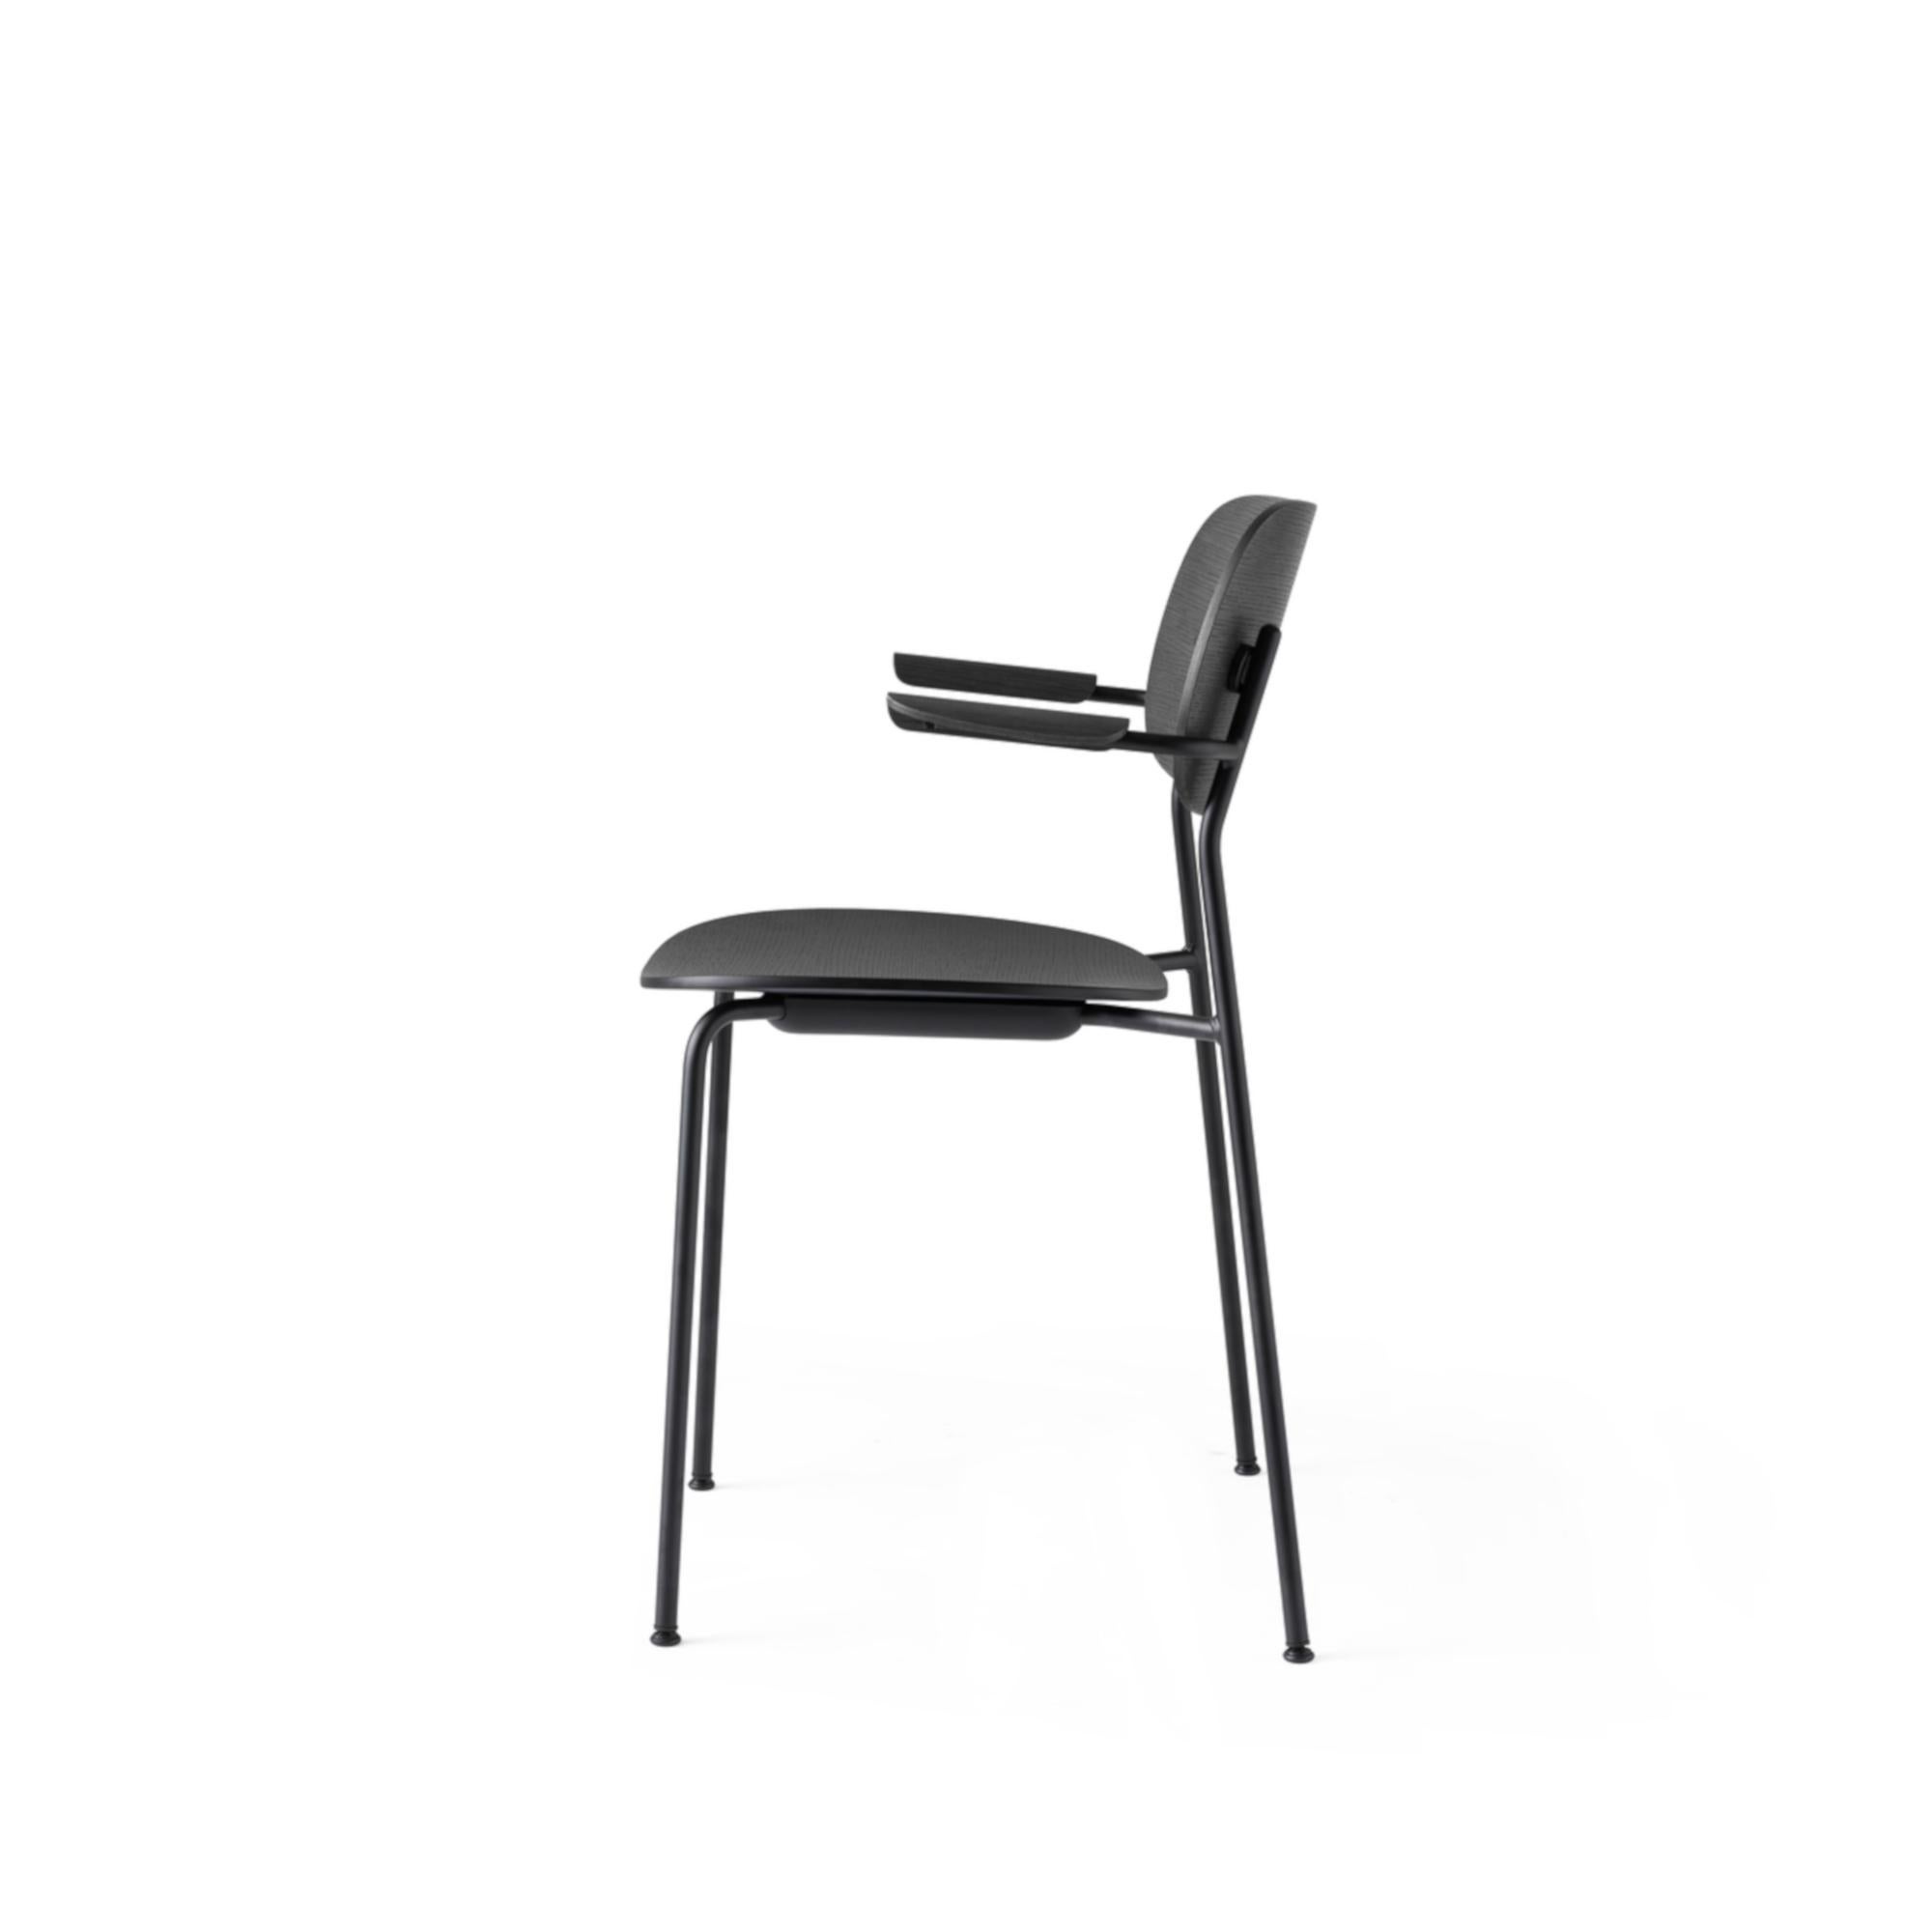 Together, mutually, in common: the words that define the prefix ‘co-’ are at the heart of our new Co Chair design. Conceived in collaboration with The Office Group and Norm Architects, the multifunctional chair adapts to a wide range of needs and